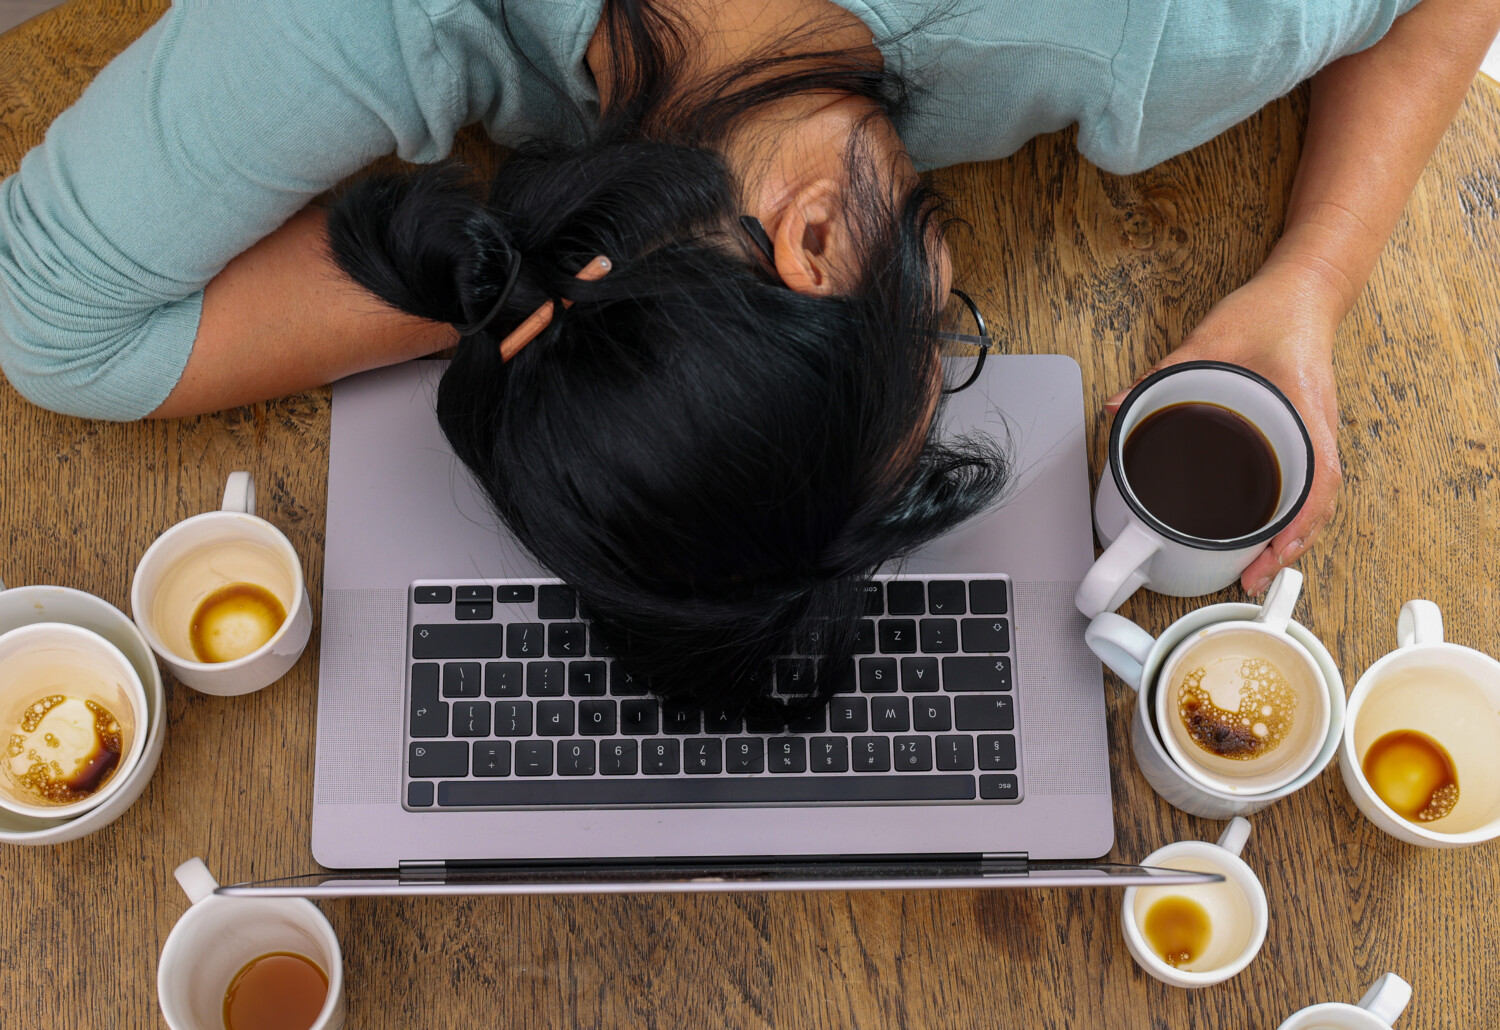 Exhausted worker with head on laptop surrounded by coffee cups